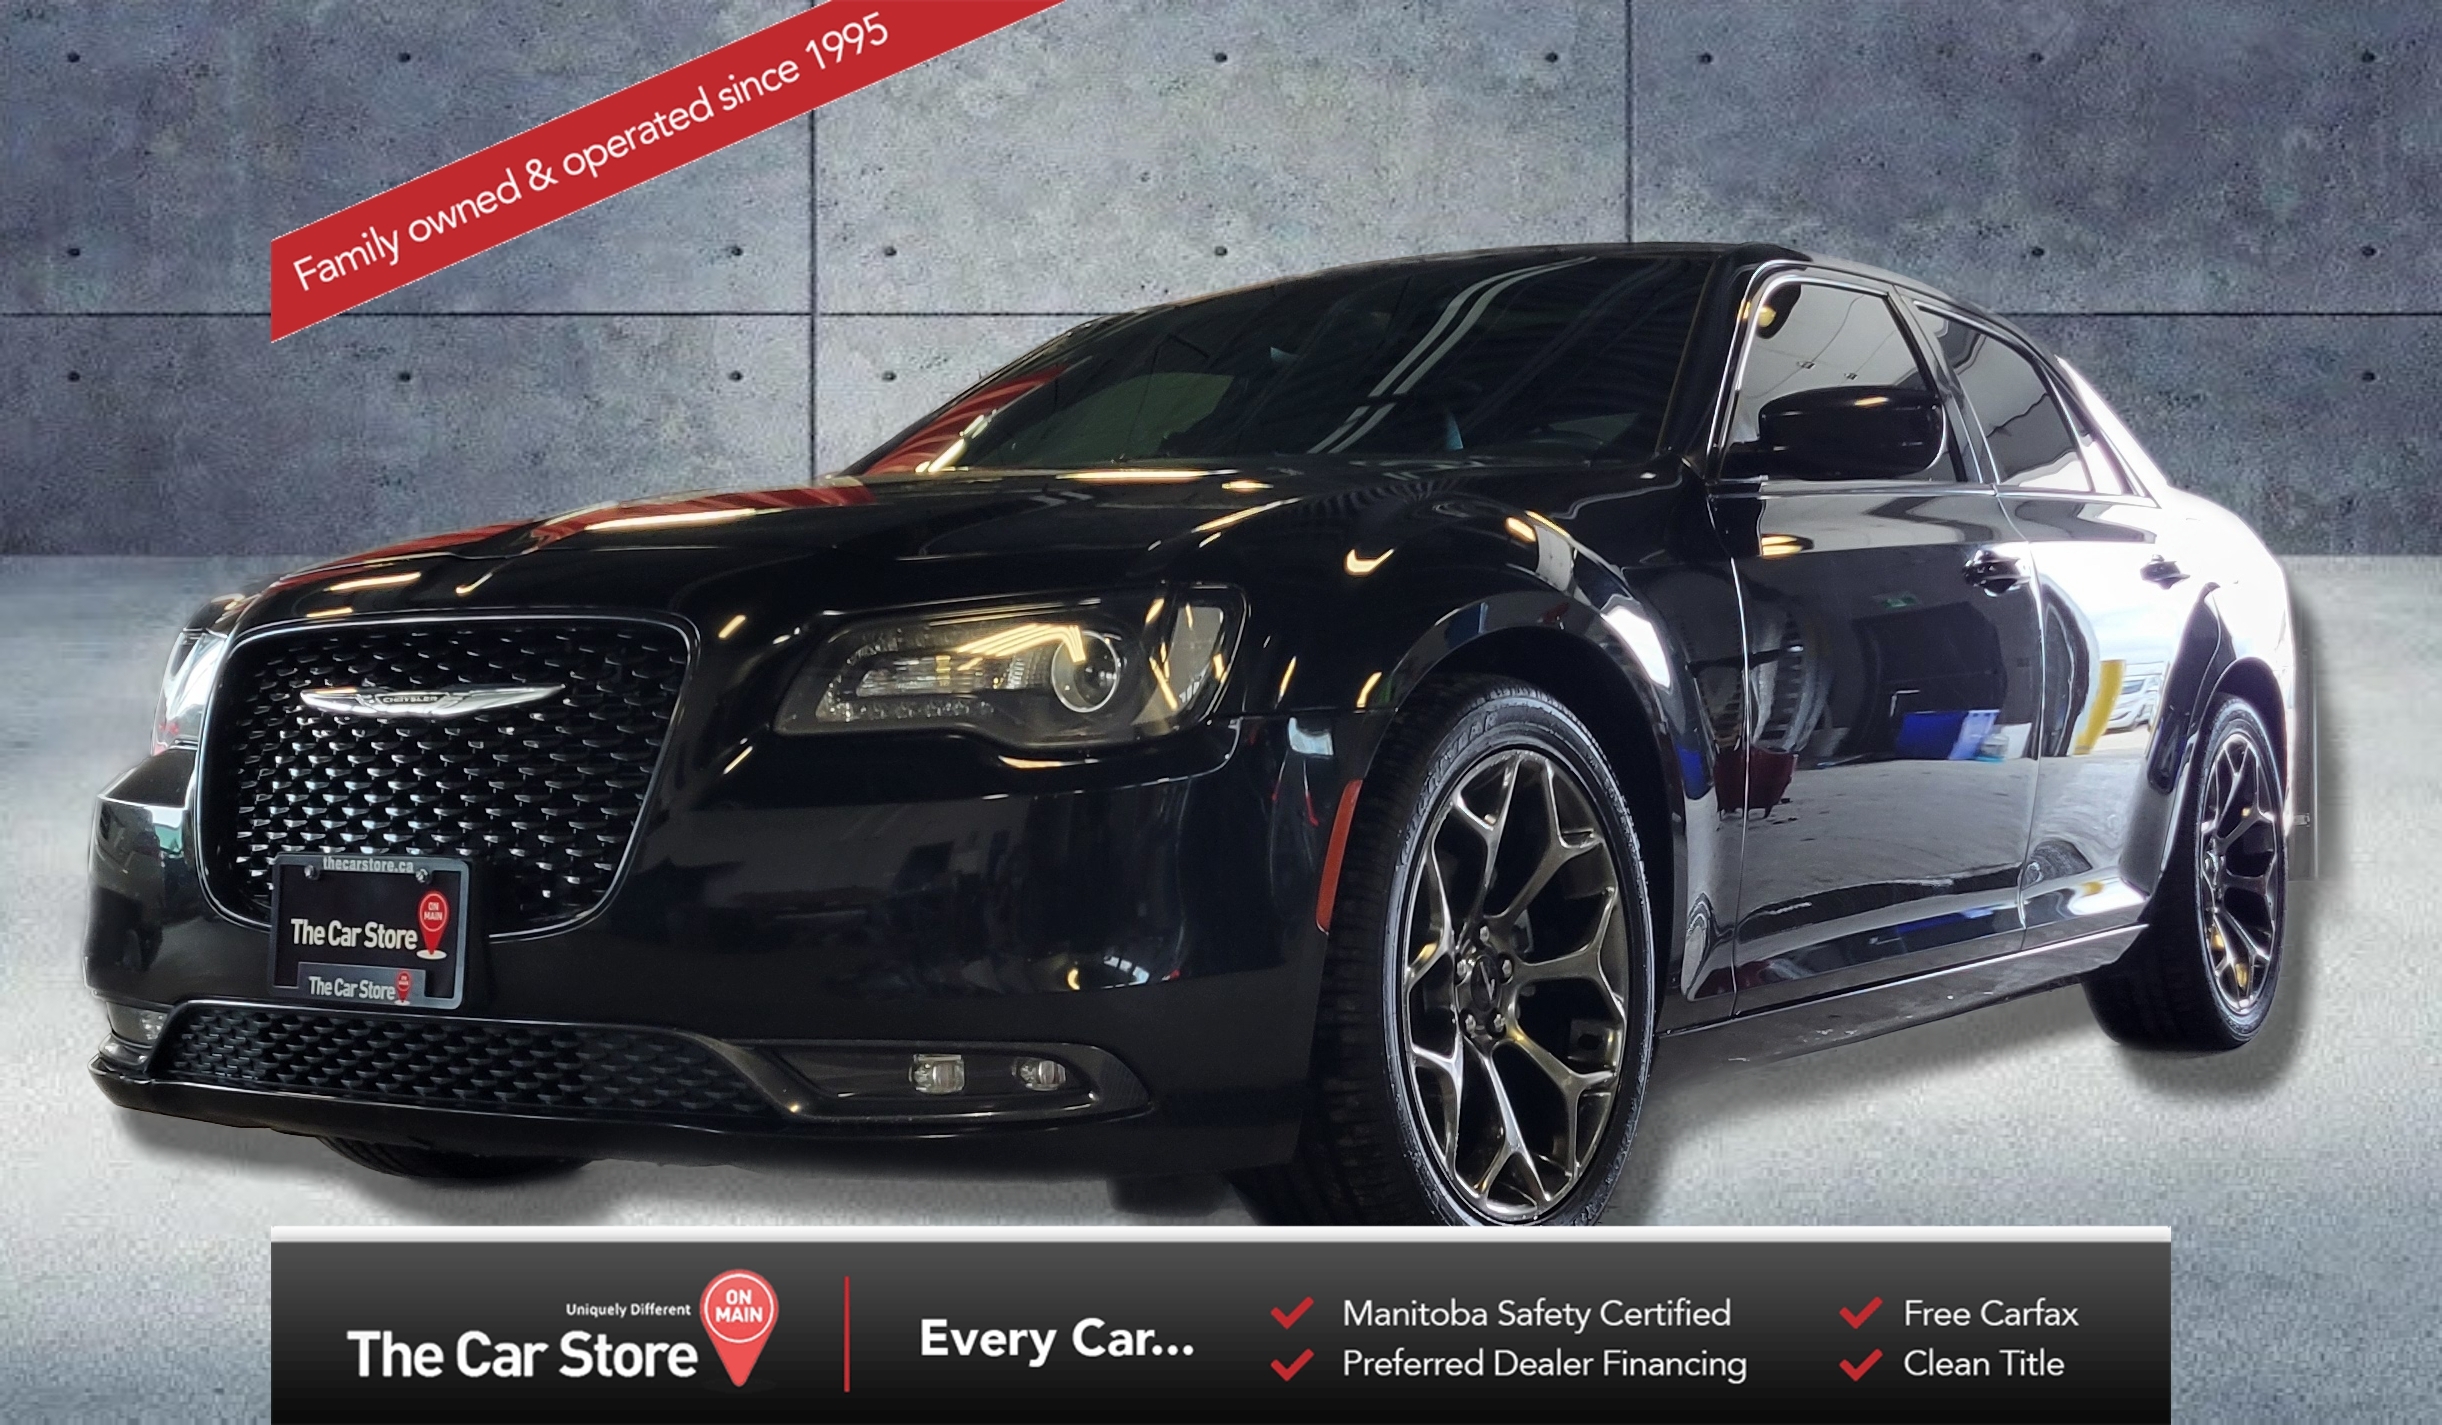 2016 Chrysler 300 300S RWD| Leather, Pano Roof, Navi, Clean Title!